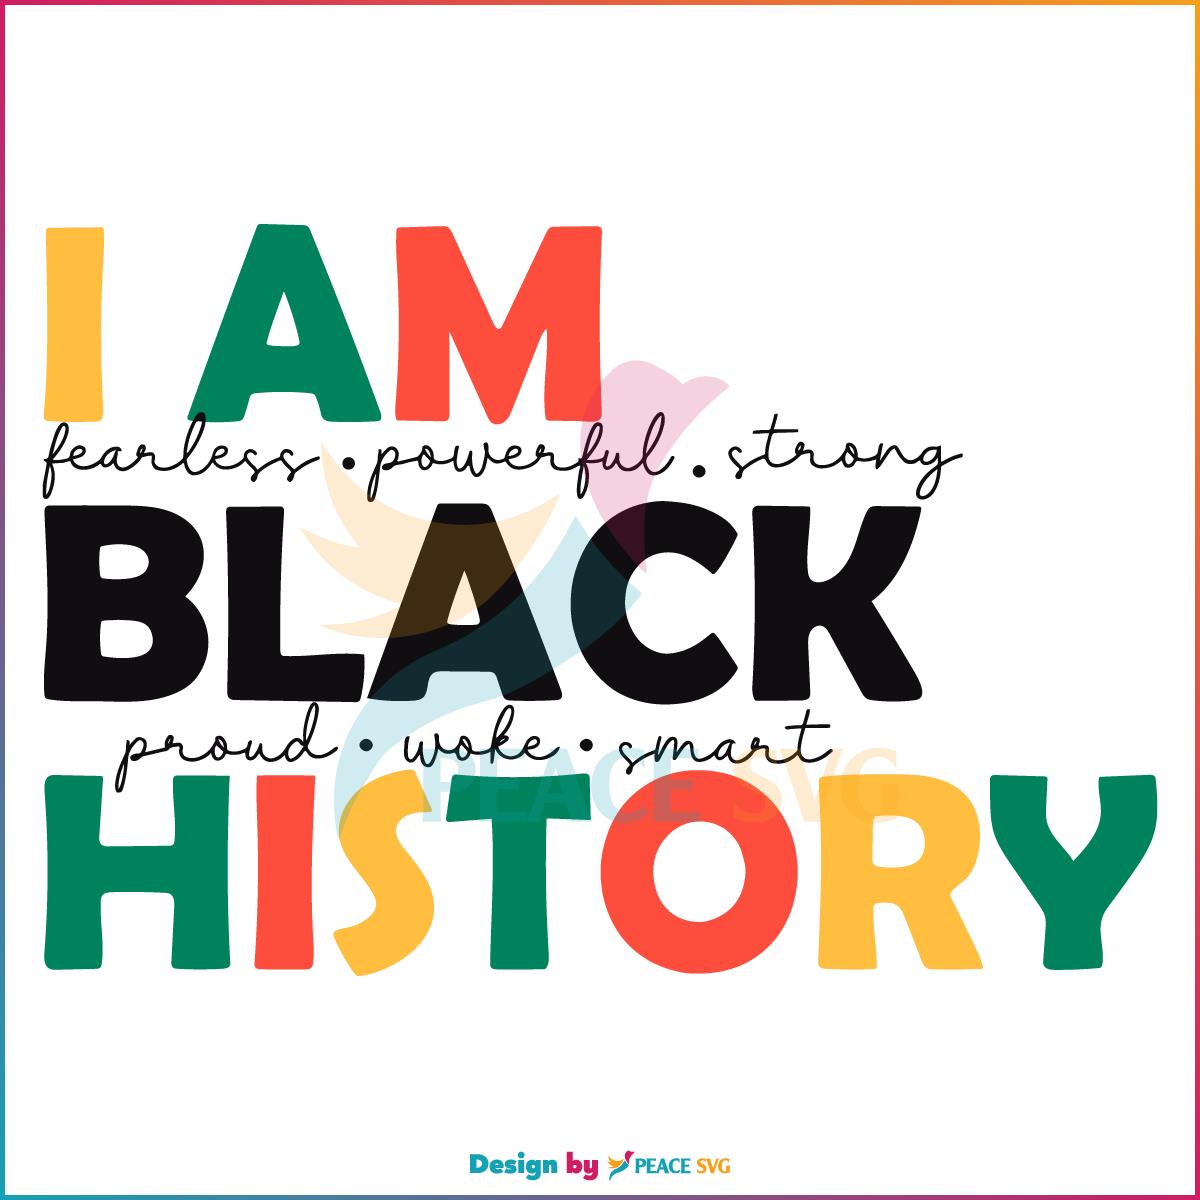 I Am Black History Happy Juneteenth Day SVG Cutting Files » PeaceSVG